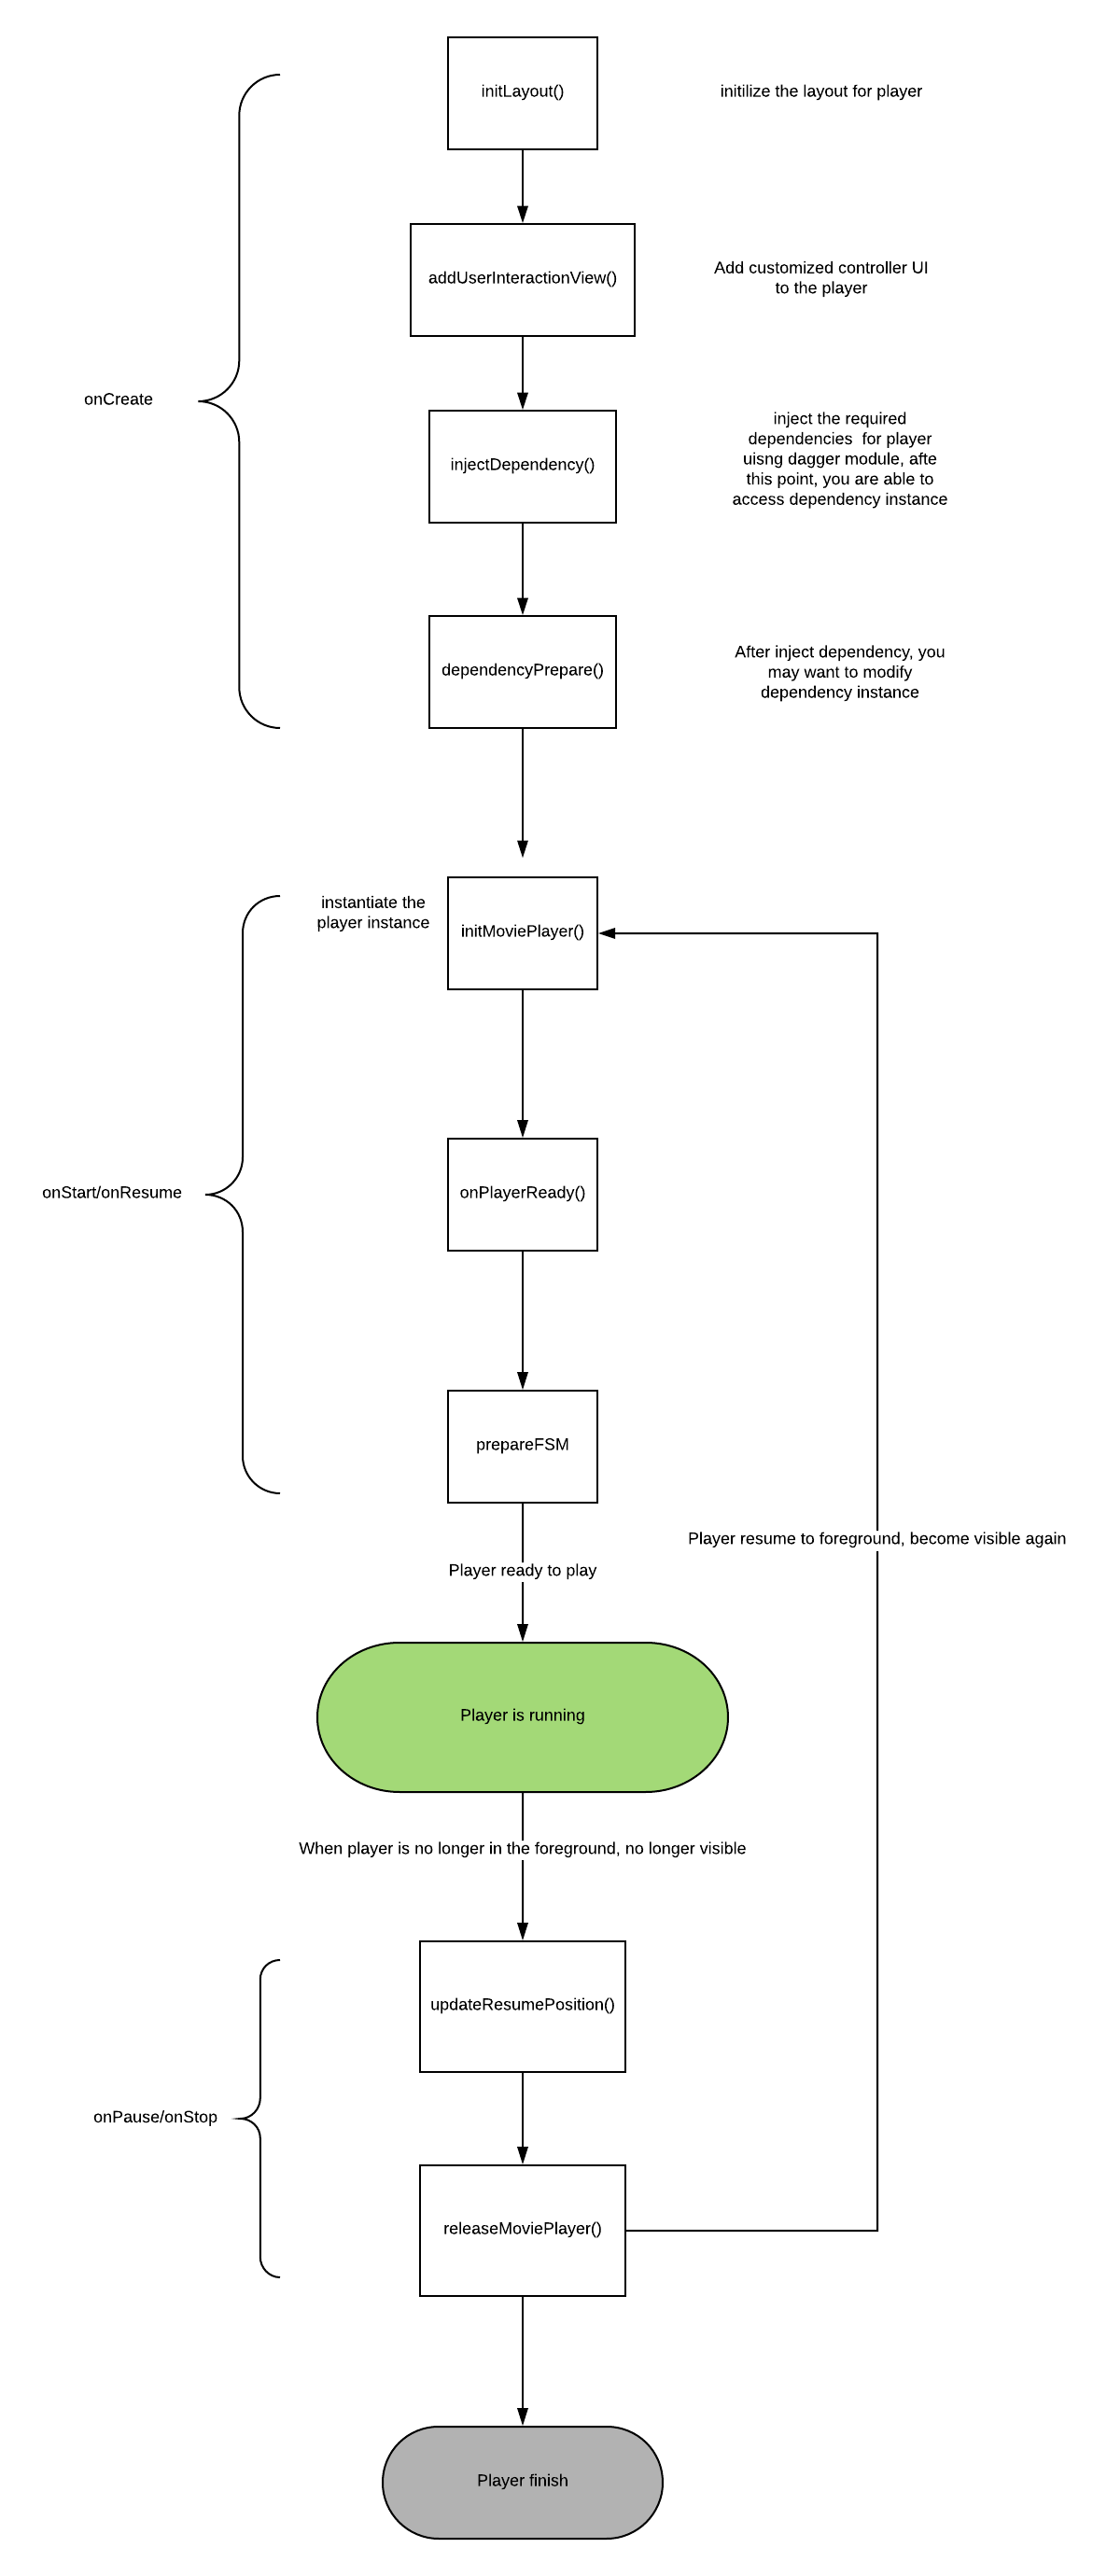 tubiplayer_lifecycle.png